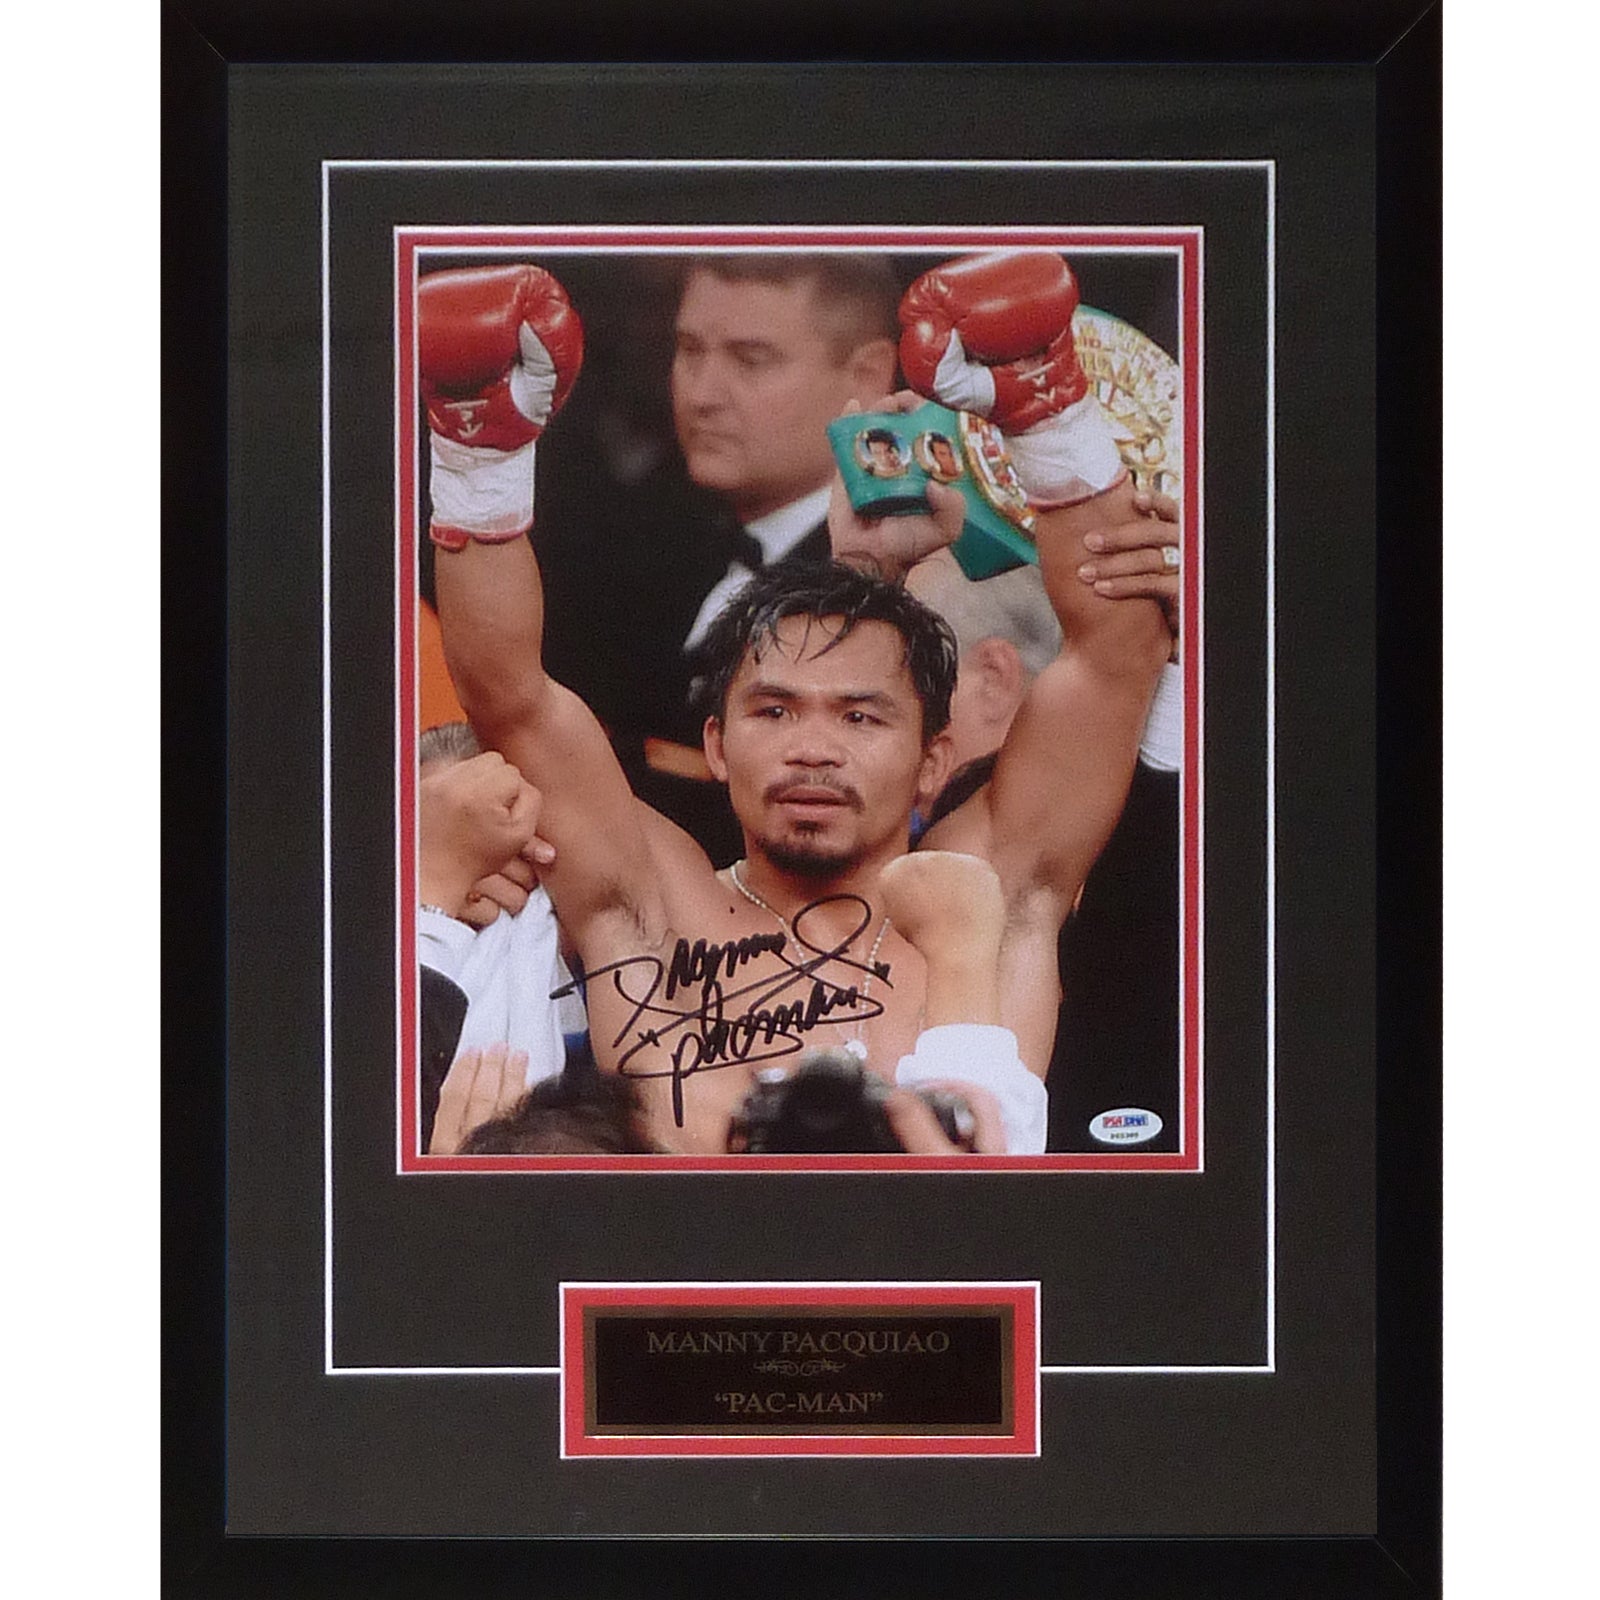 Manny Pacquiao Autographed Boxing Deluxe Framed 11x14 Photo with Nameplate - PSADNA